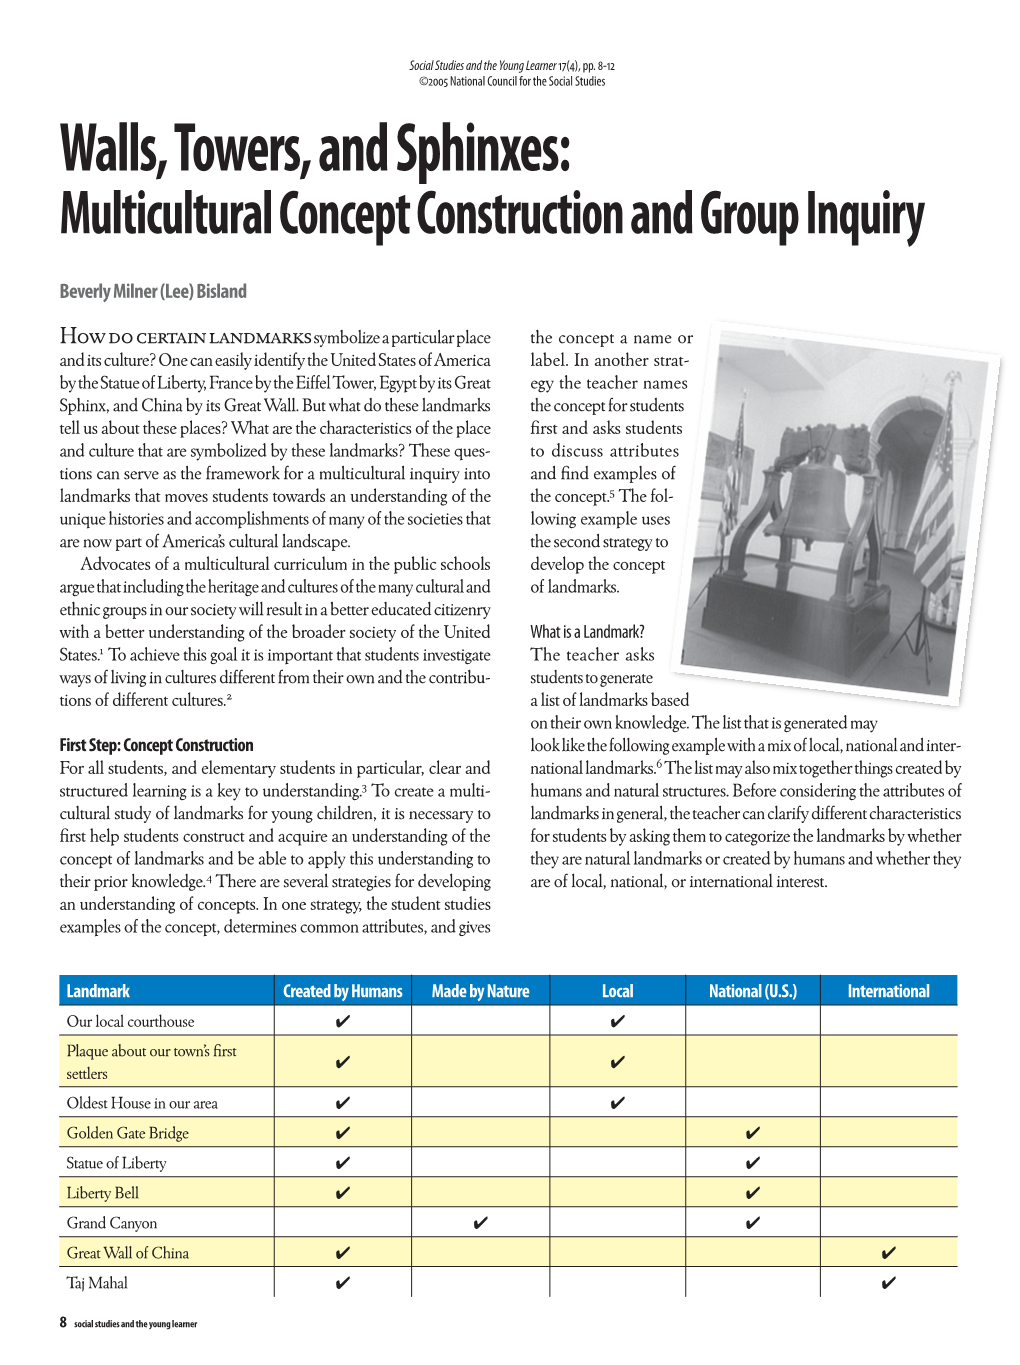 Walls, Towers, and Sphinxes: Multicultural Concept Construction and Group Inquiry